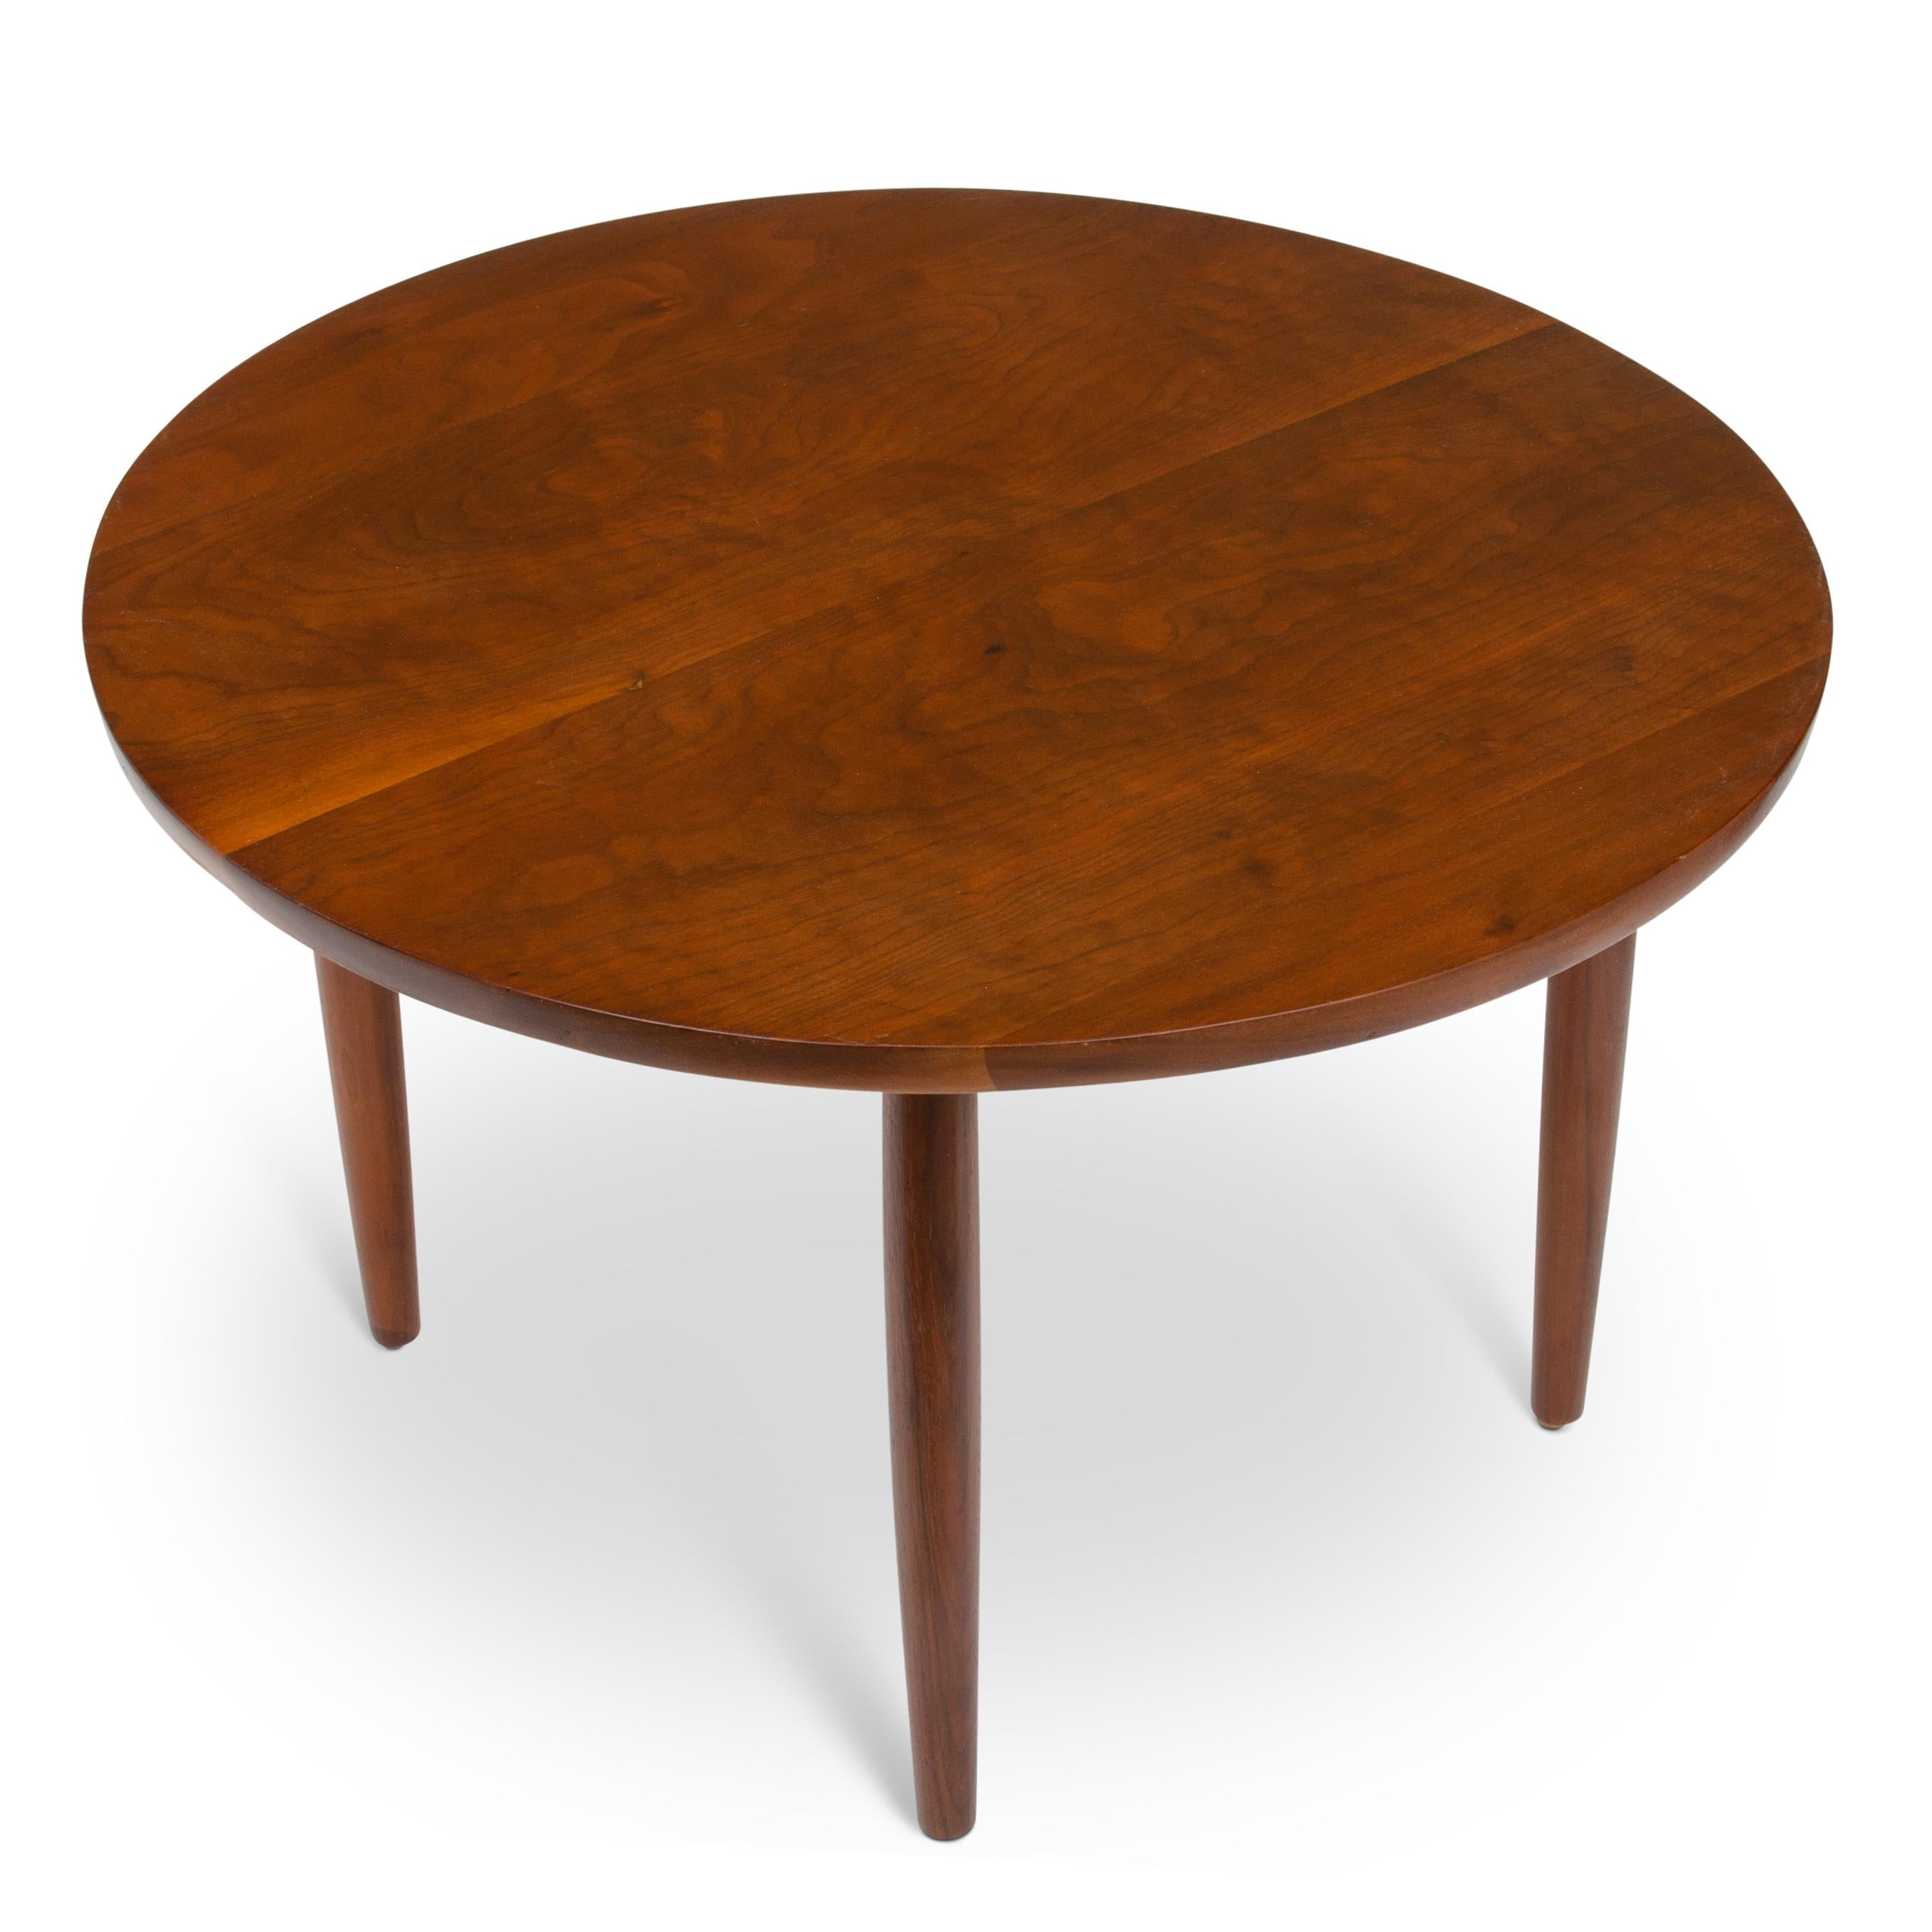 An unsigned round walnut coffee table by Cesare Occhi (New Hope School). Purchased directly from the estate of a relative of Mr. Occhi in Bucks County Pa. Cesare Occhi apprenticed with George Nakashima and the quality of his work and relationship to